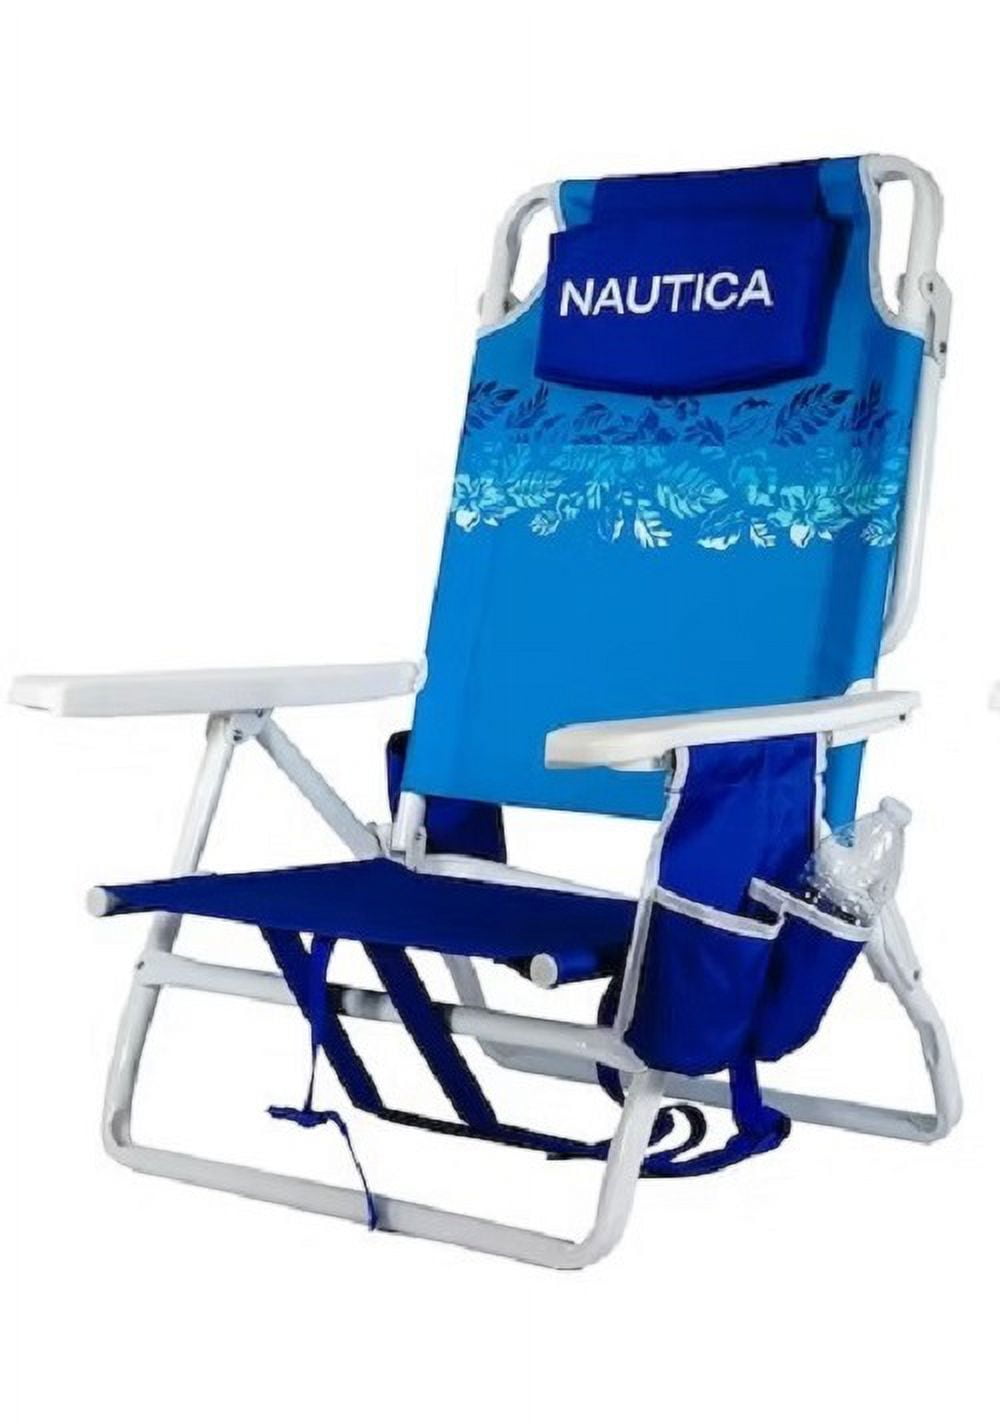 Nautica Portable Beach Chair, Double Cup Holder, Padded Straps ( Island  Stripe) 